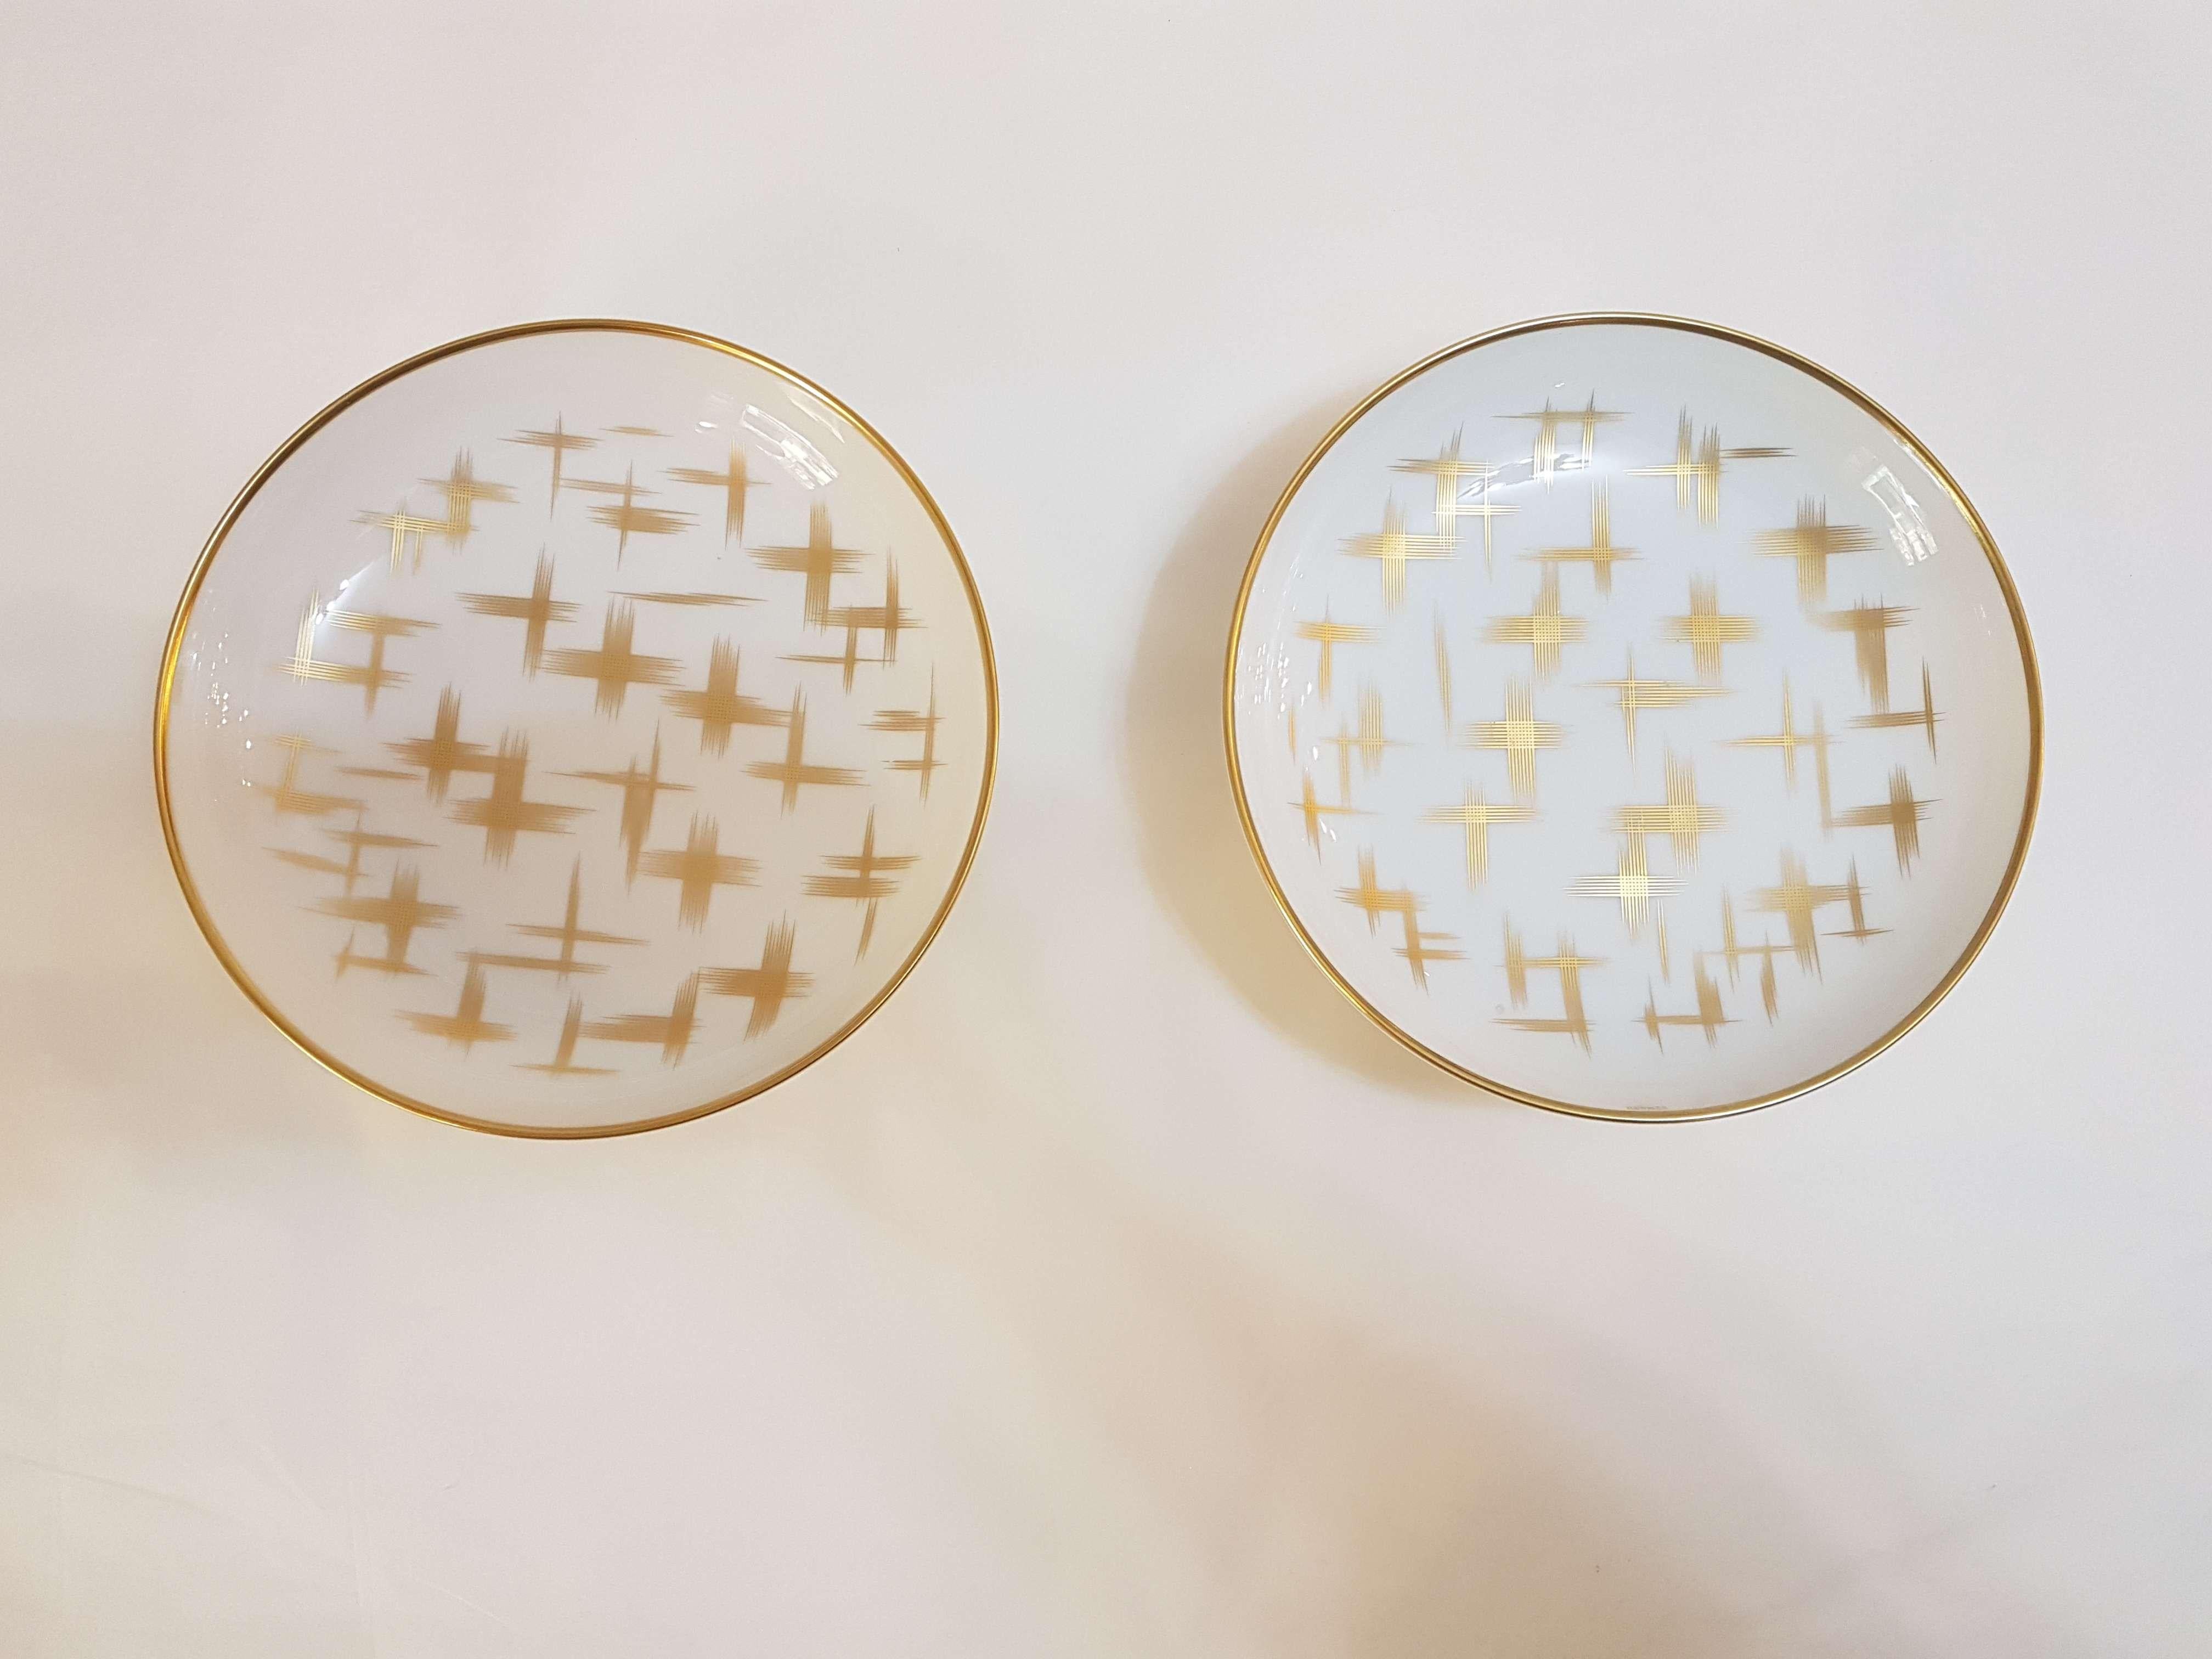 An Hermès porcelain set of two cereal plate, 